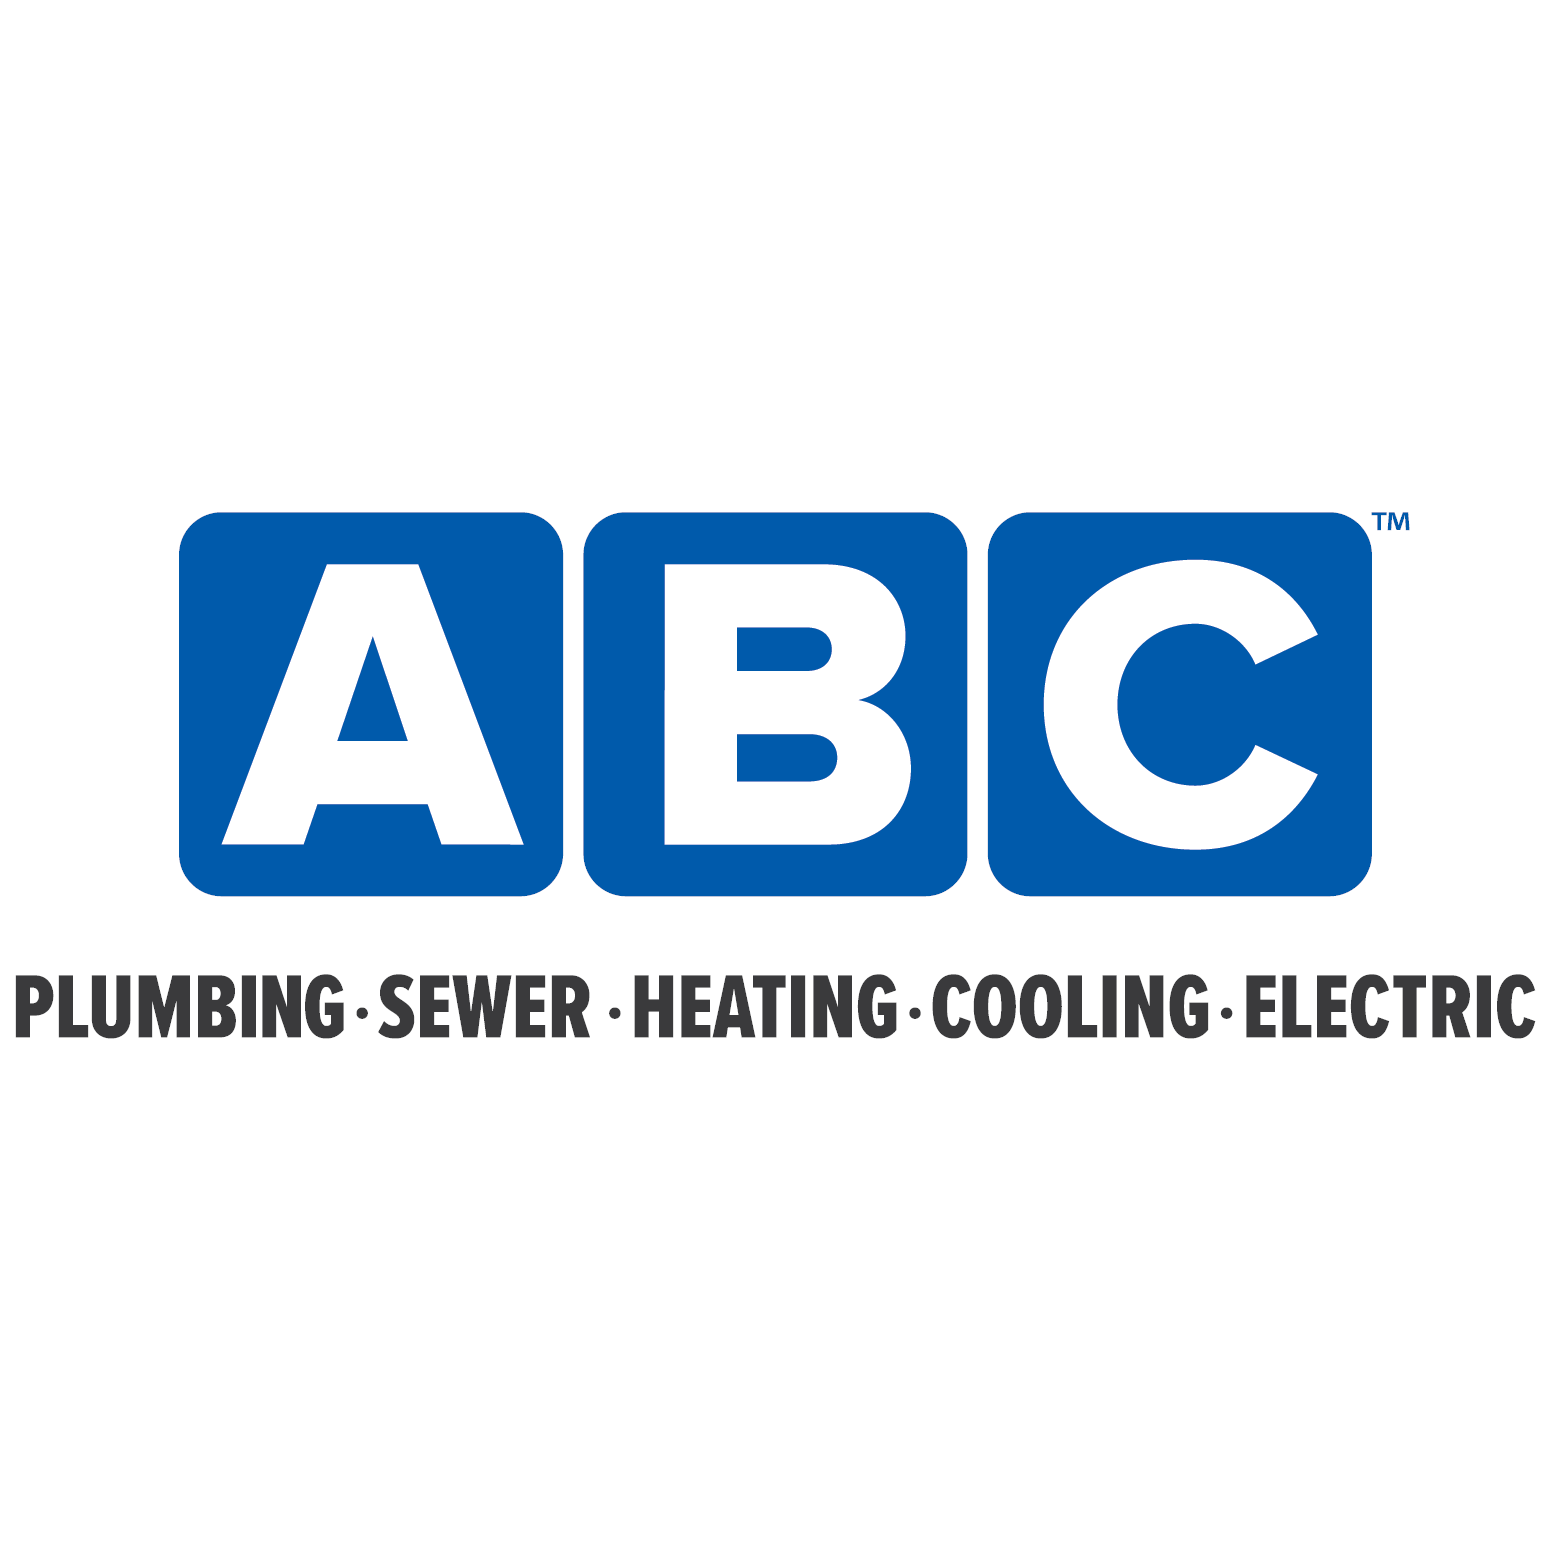 ABC Plumbing, Sewer, Heating, Cooling and Electric - Arlington Heights, IL 60004 - (847)419-1000 | ShowMeLocal.com